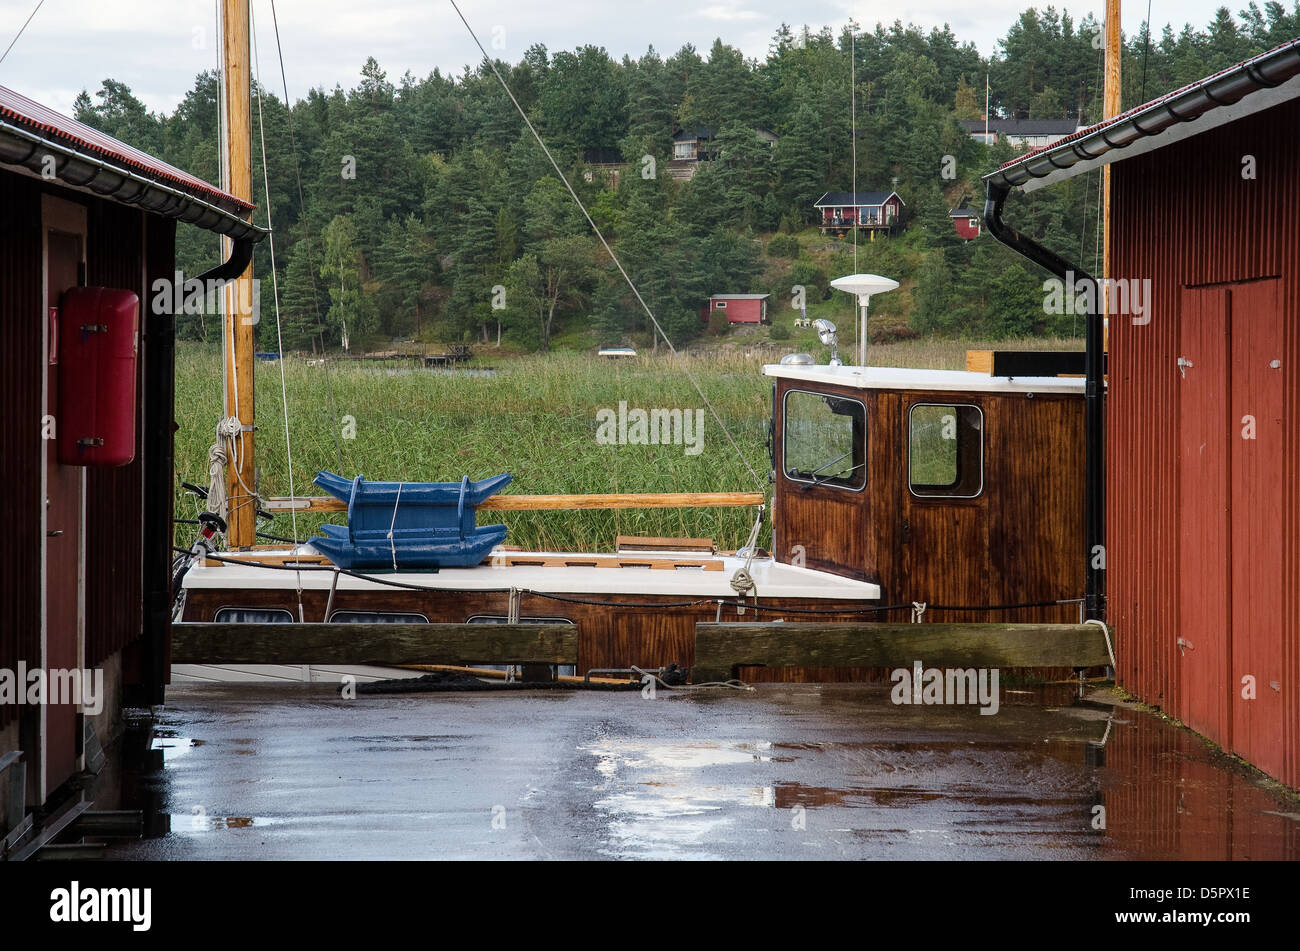 One of Sweden's small inland fishing harbors in Lake Vänern. Spiken fishing harbor in Swedens largest lake. Stock Photo